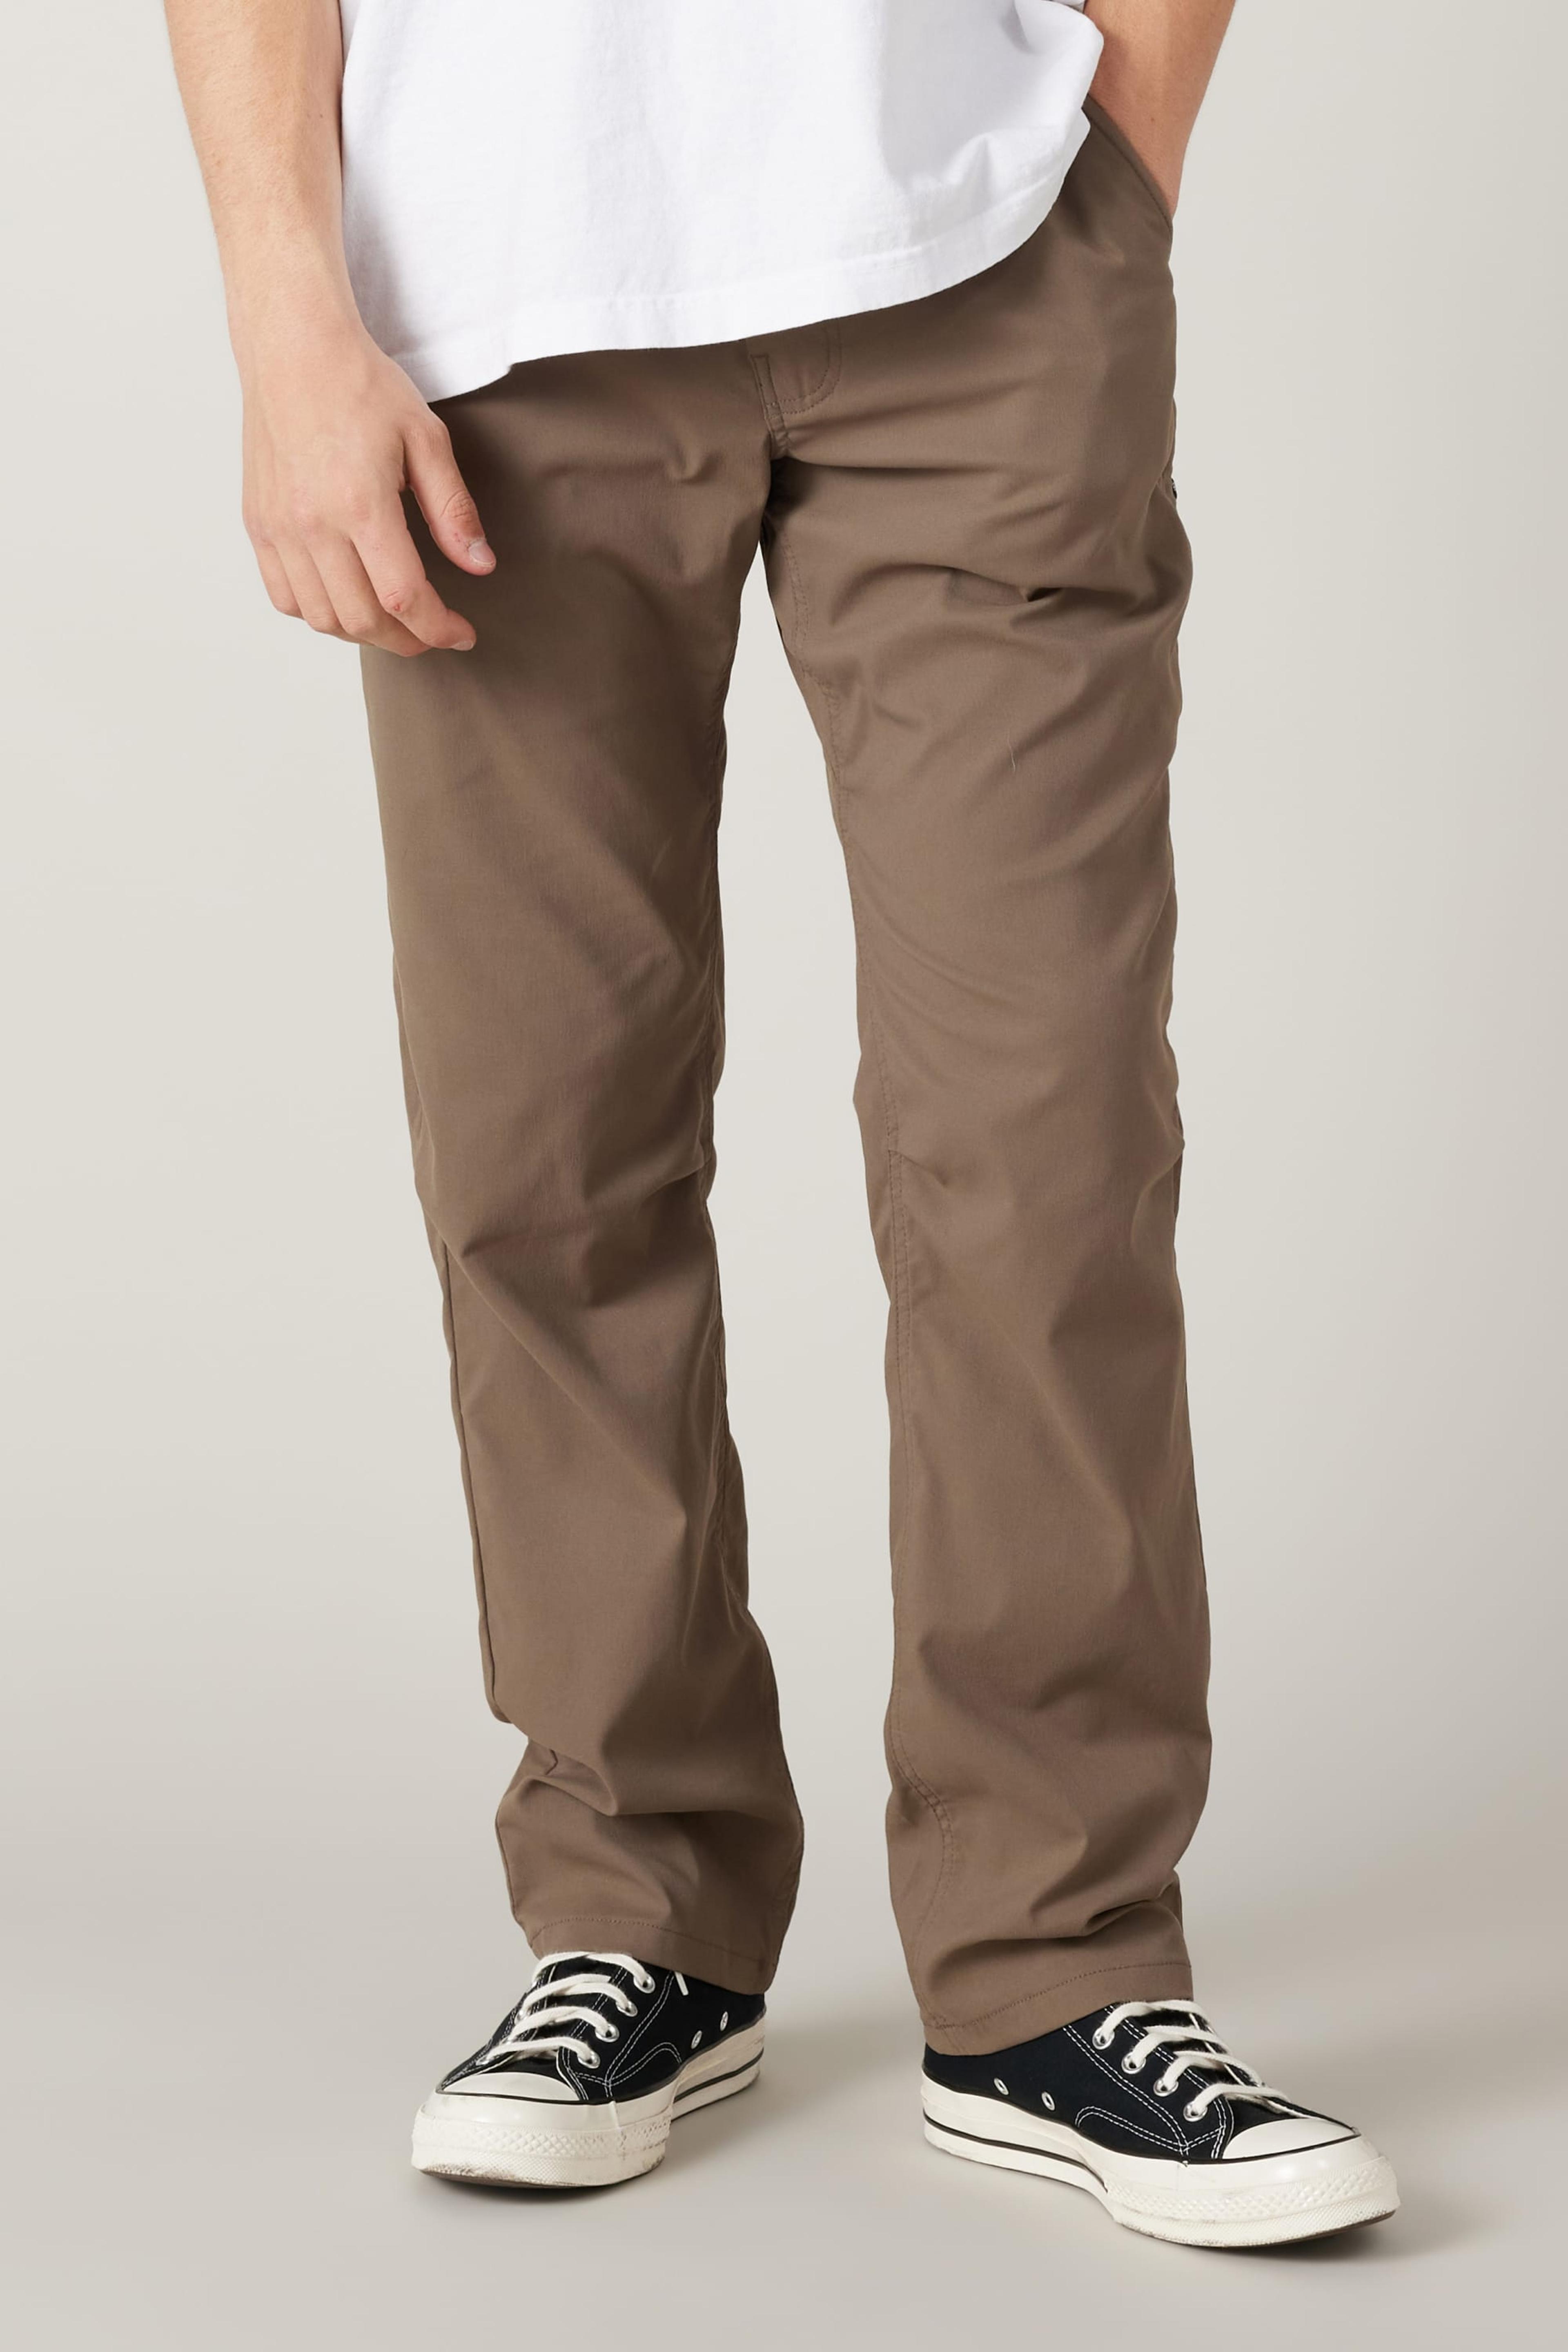 Alternate View 53 of 686 Men's Everywhere Pant - Relaxed Fit